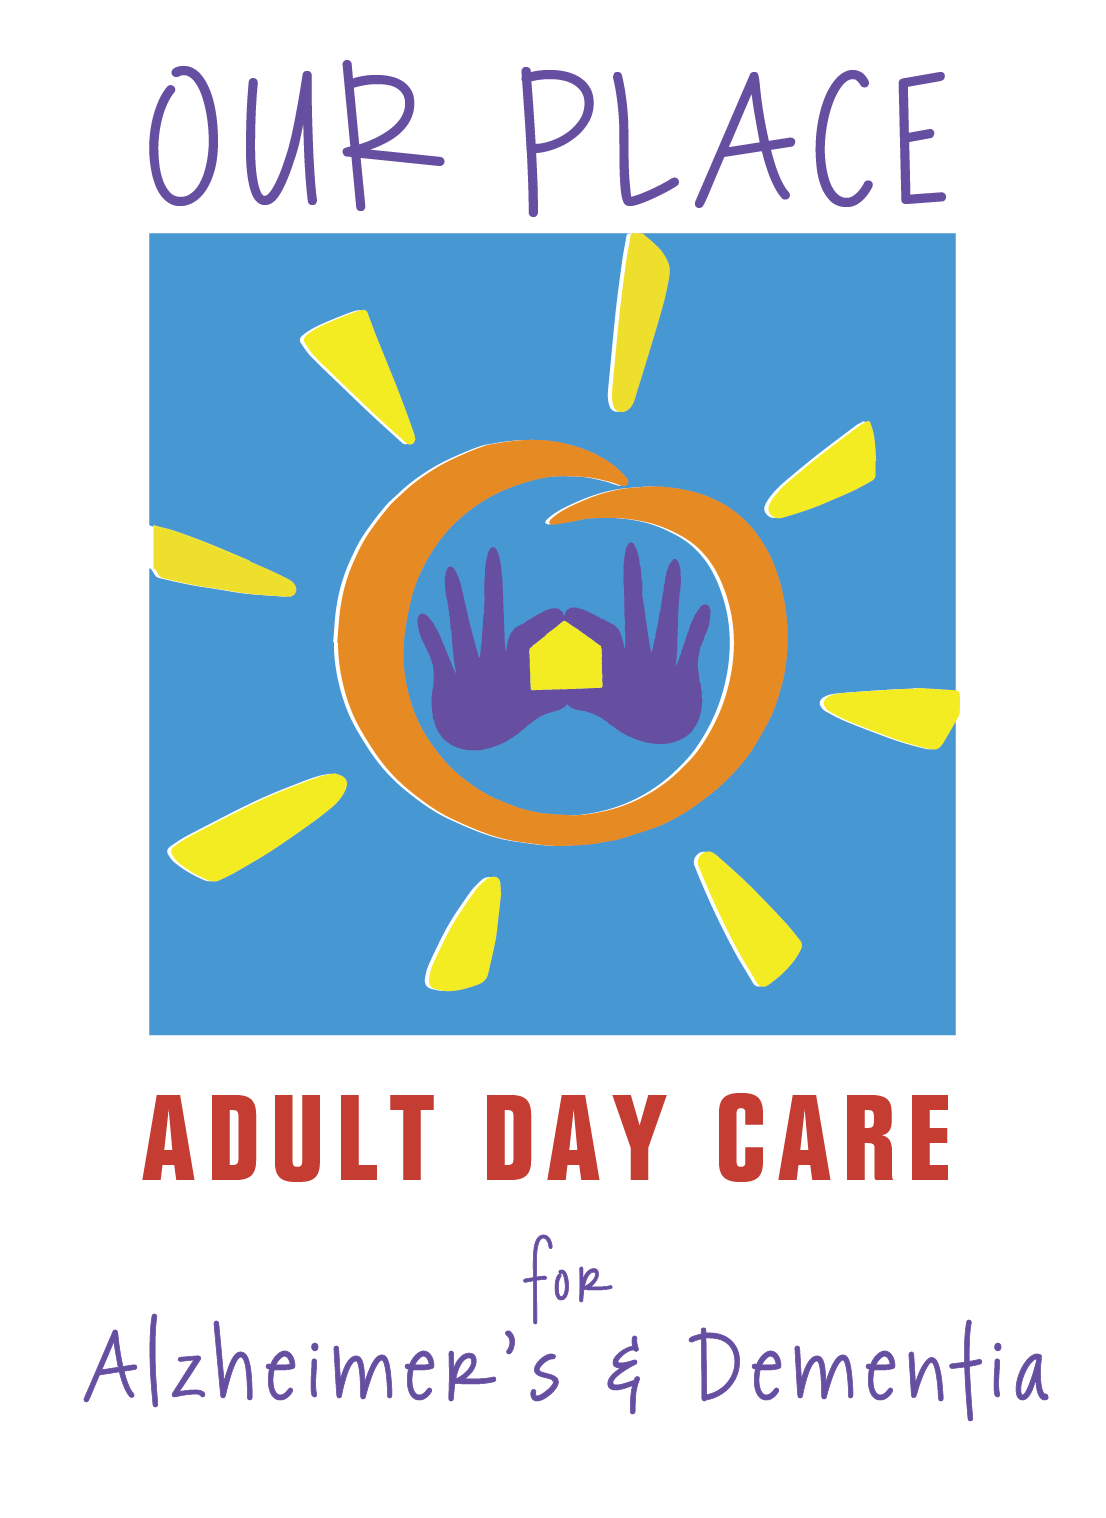 Adult Day Care at "Our Place" logo